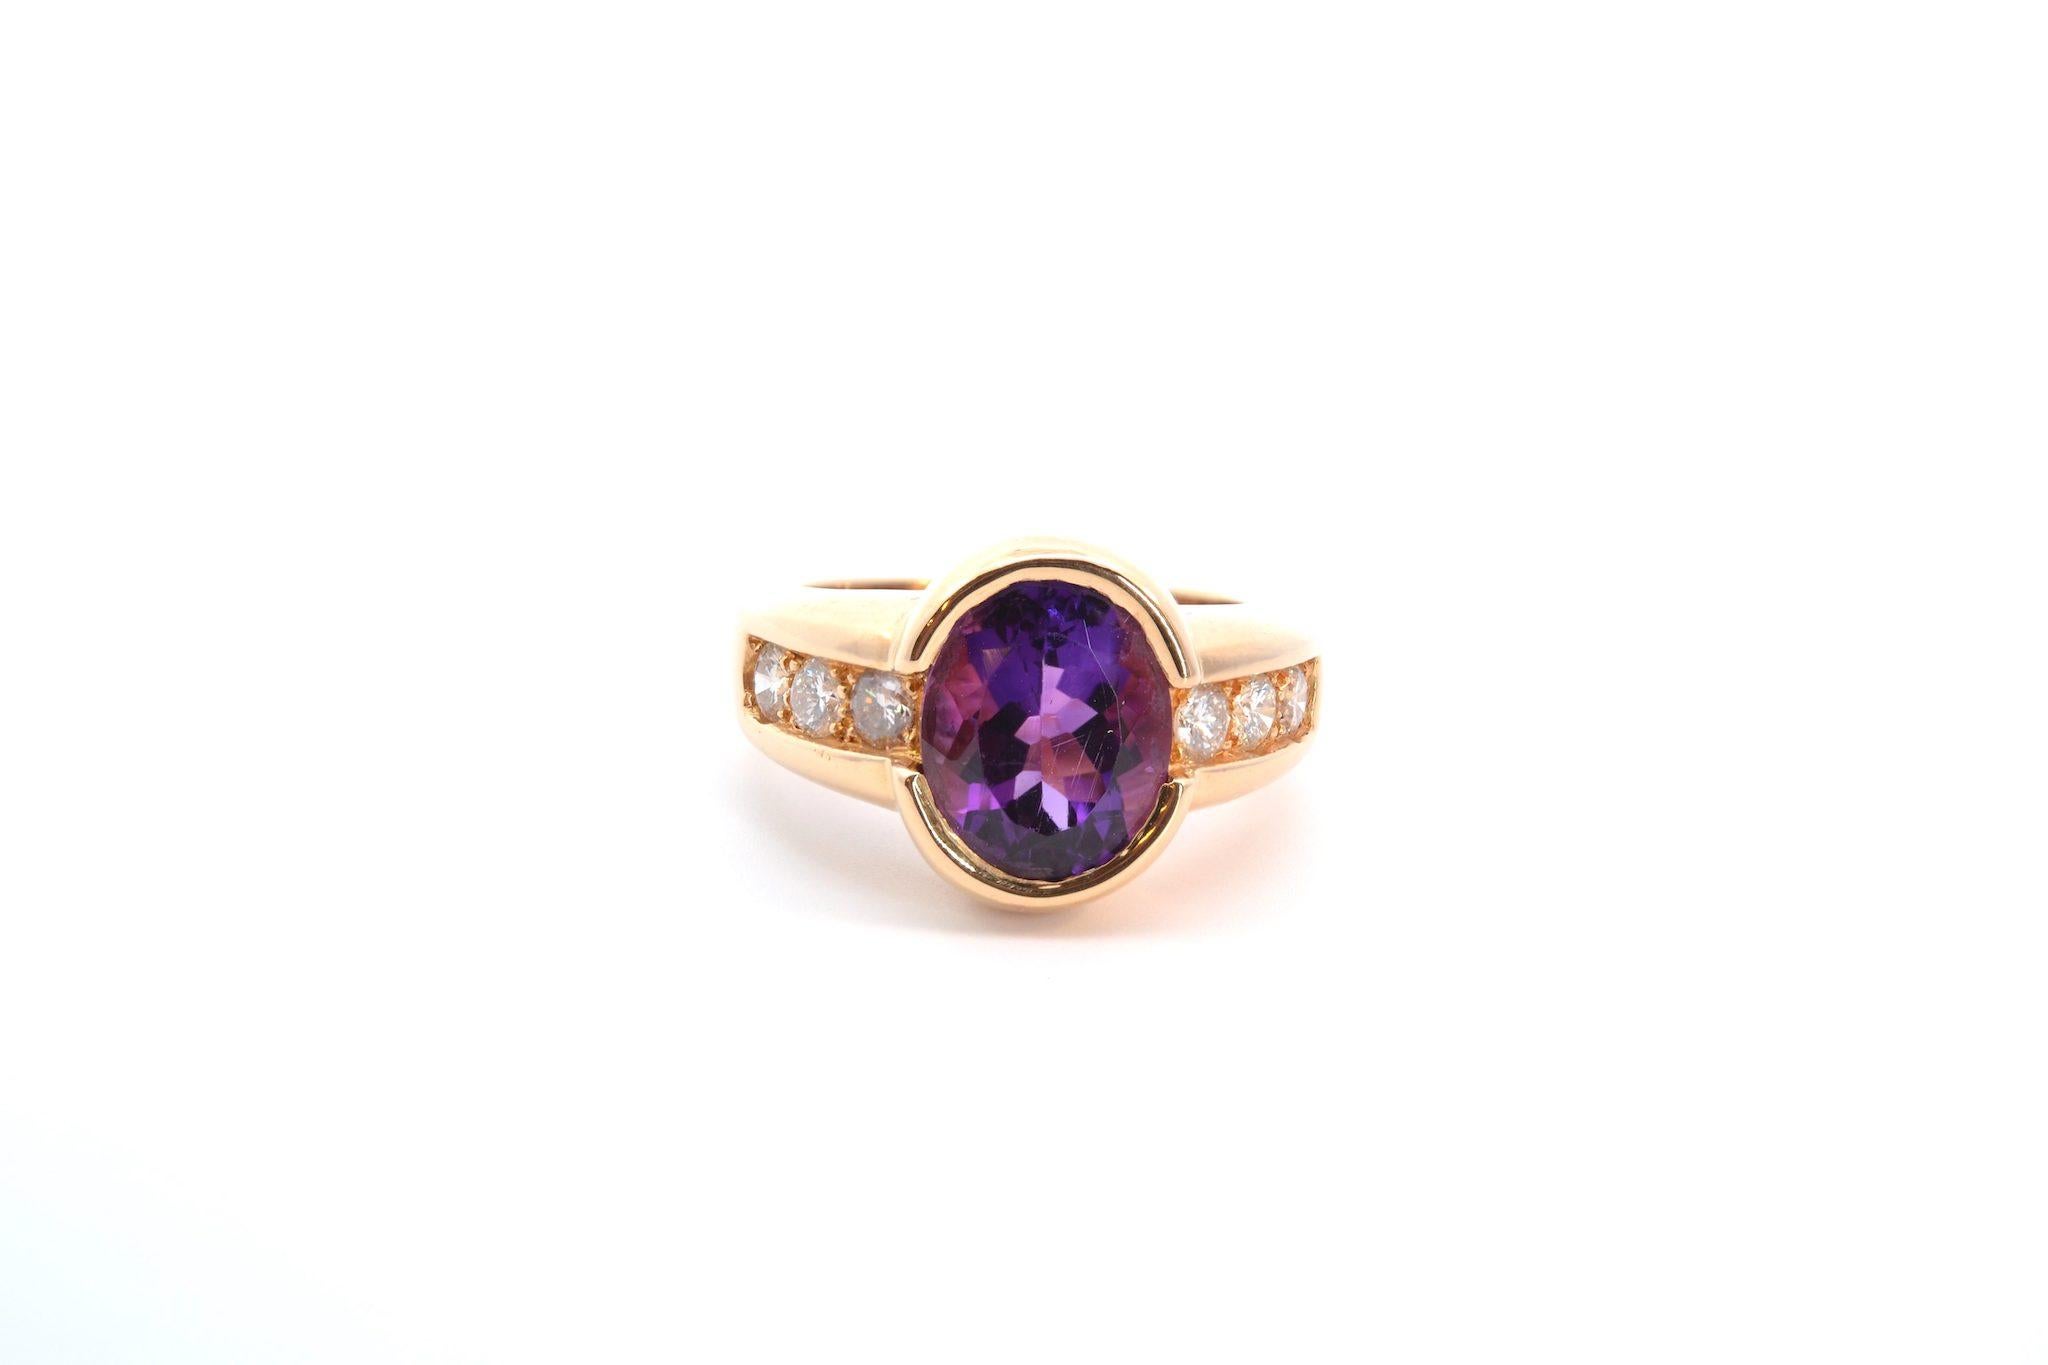 Stones: 1 amethyst of 4.80 cts, 6 diamonds, weight: 0.96ct
Material: 18k yellow gold
Dimensions: 1.4cm x 1cm
Weight: 12g
Period: Recent
Size: 52 (free sizing)
Certificate
Ref. : 25061